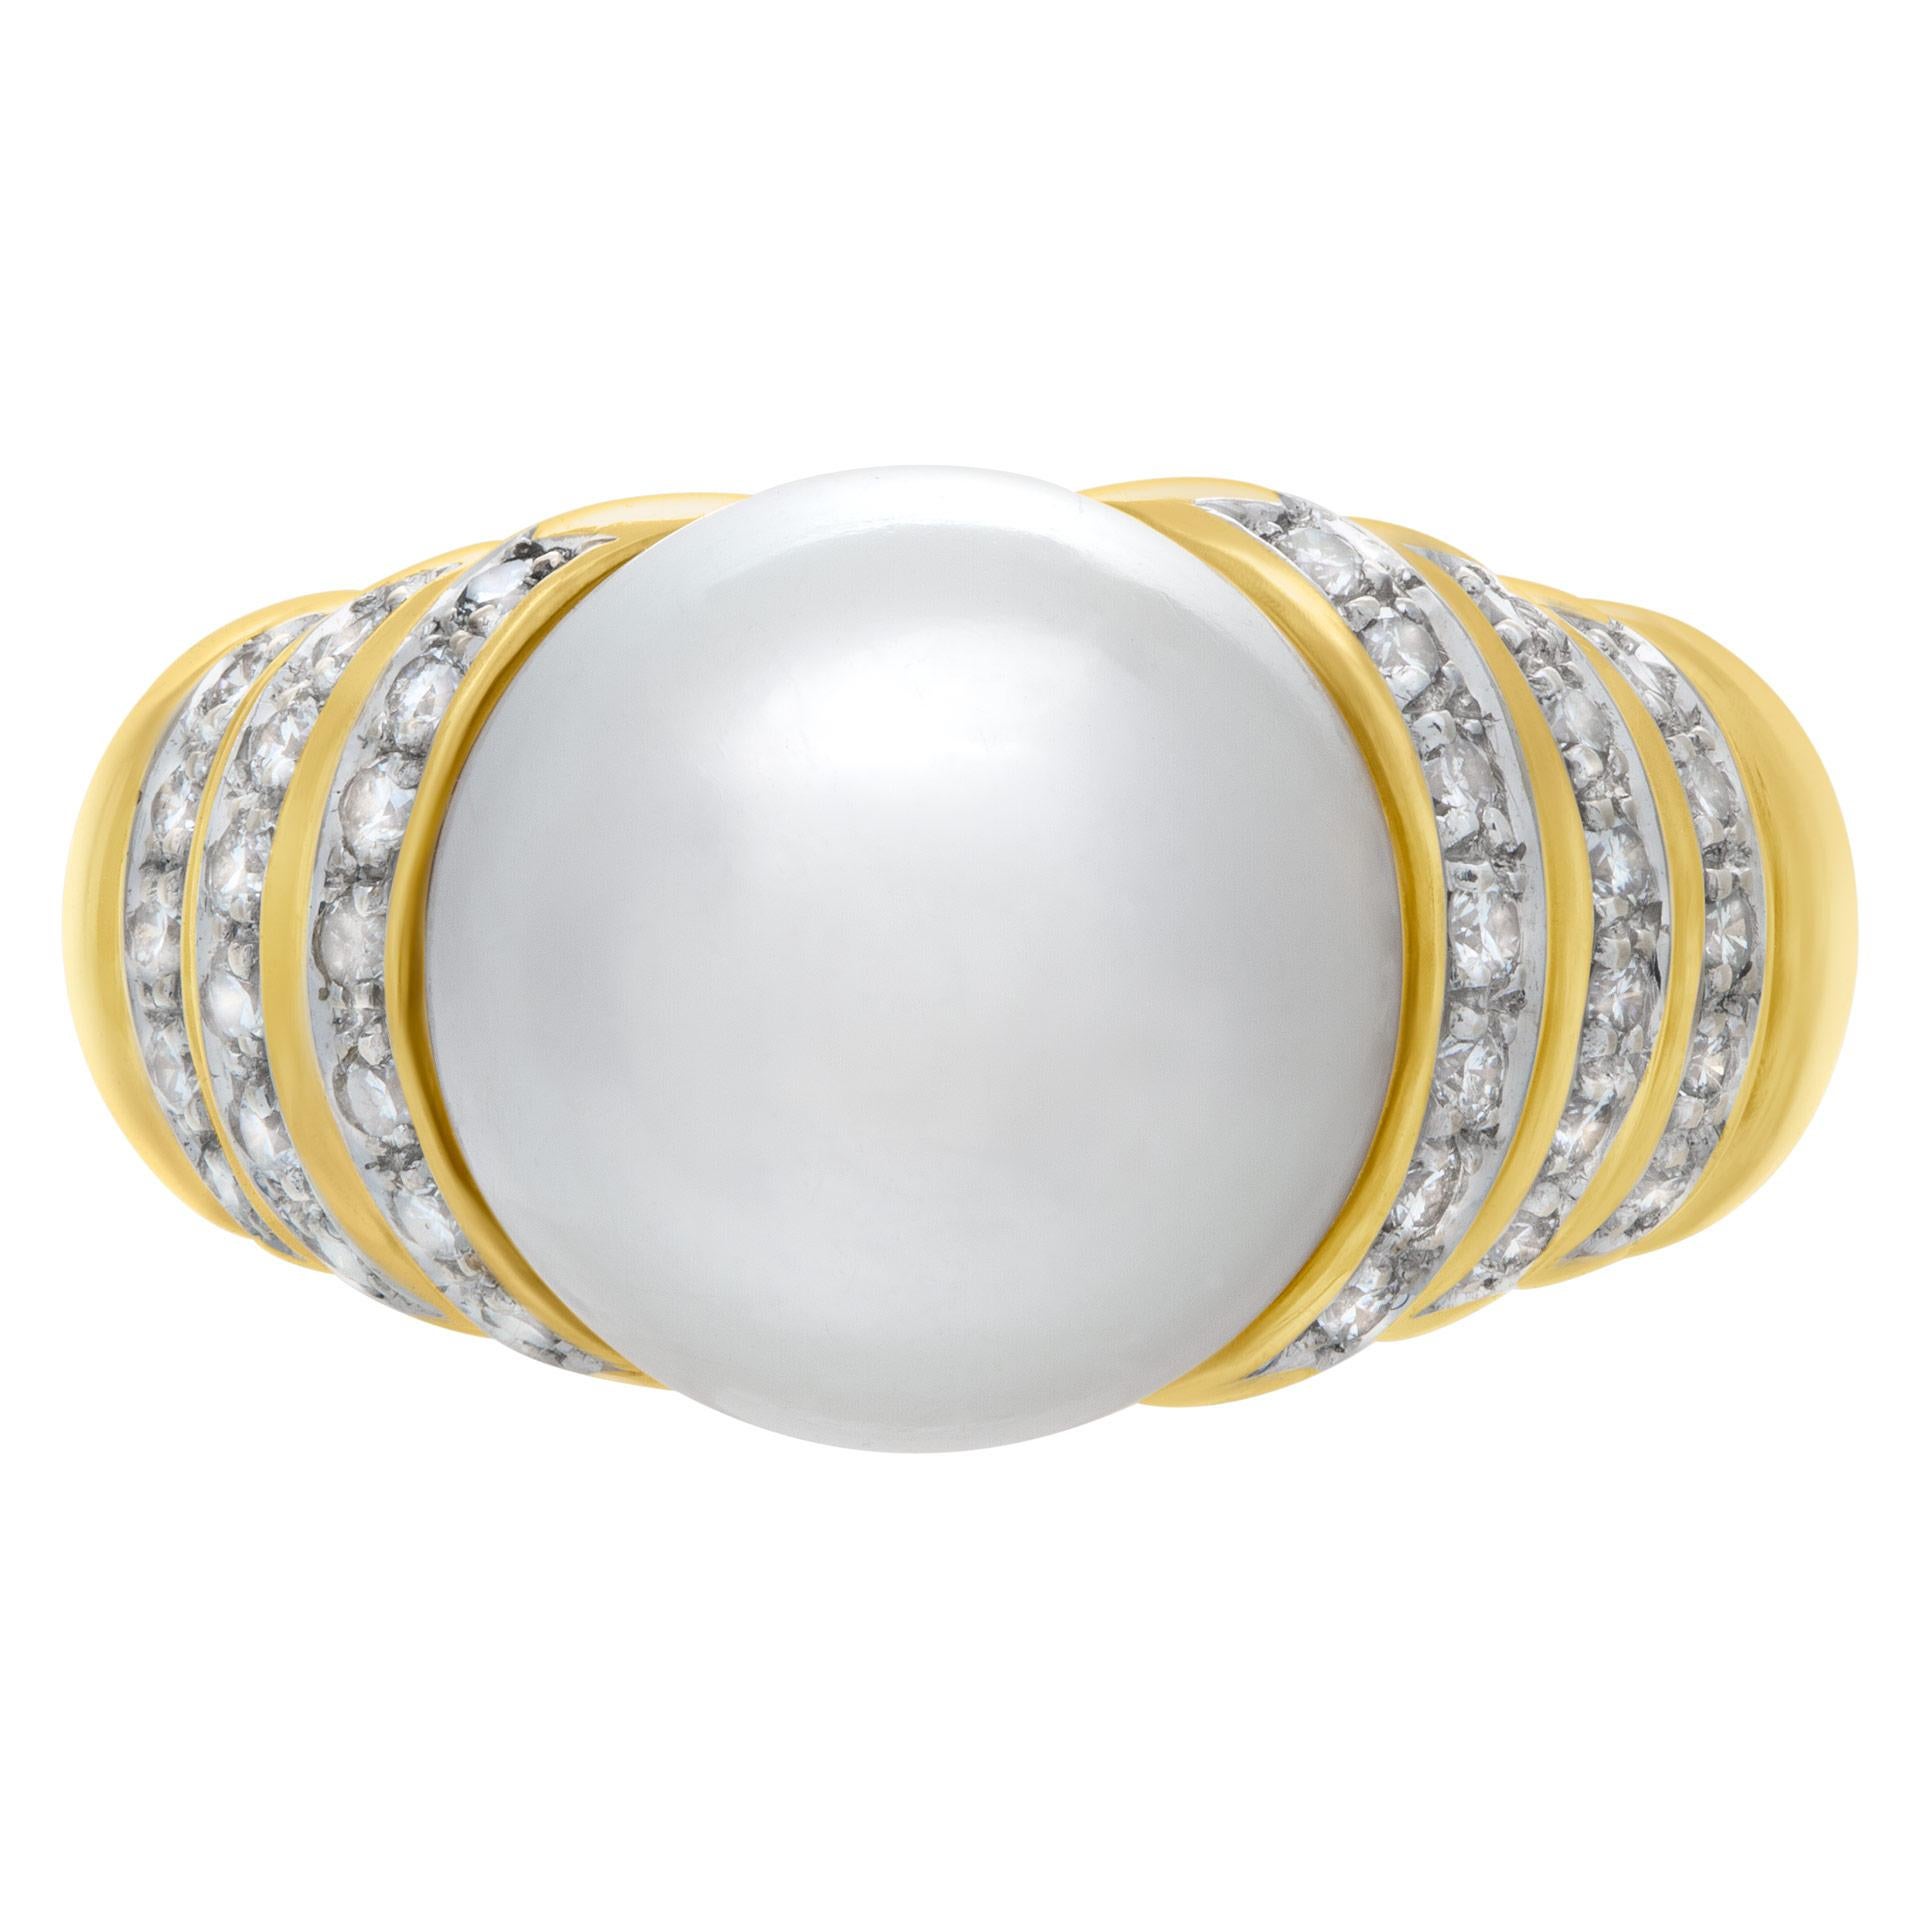 Stunning 12mm Water Pearl and approximely .36 carats in diamond accents set ring in 18k yellow gold. Size 6.75  This Pearl/diamond ring is currently size 6.75 and some items can be sized up or down, please ask! It weighs 10.1 pennyweights and is